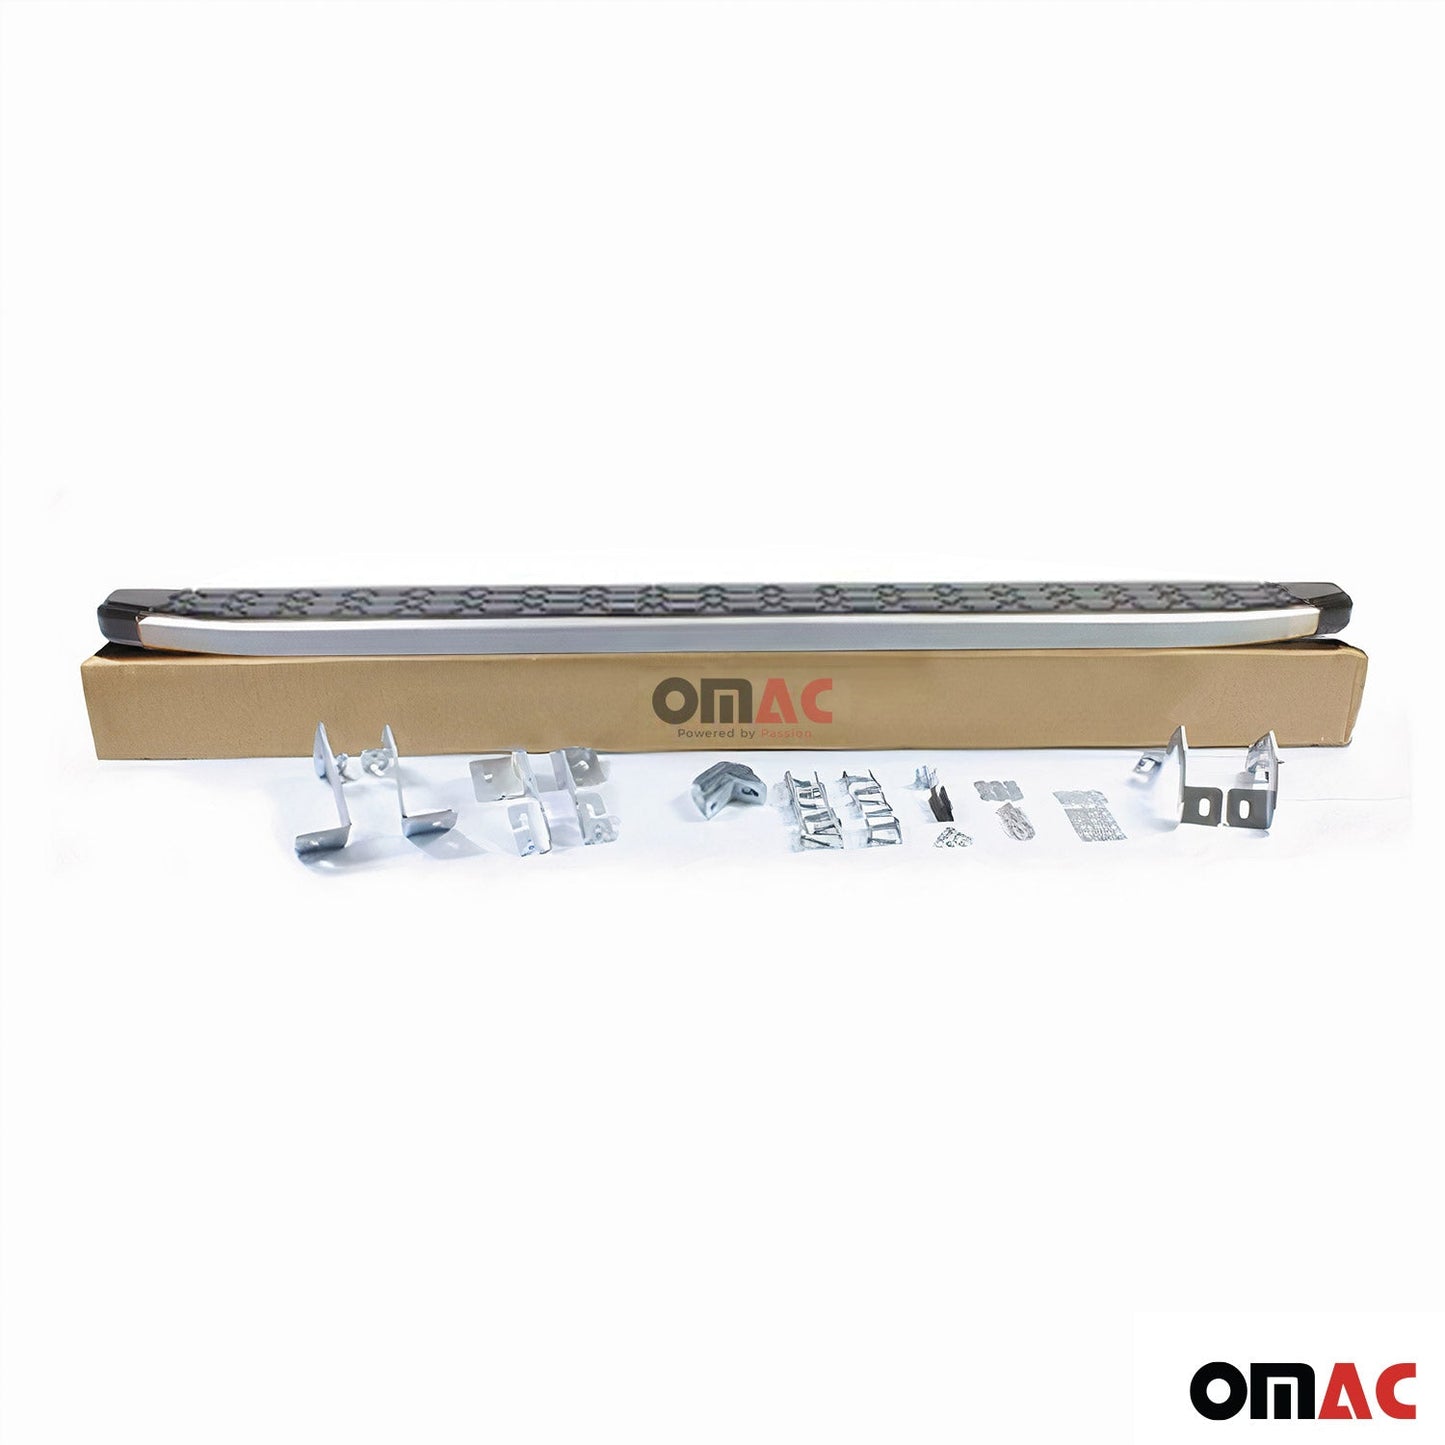 OMAC Side Steps Running Boards Nerf Bars Alu. 2 Pcs. Fits For Volvo XC90 2003-2014 7603984A